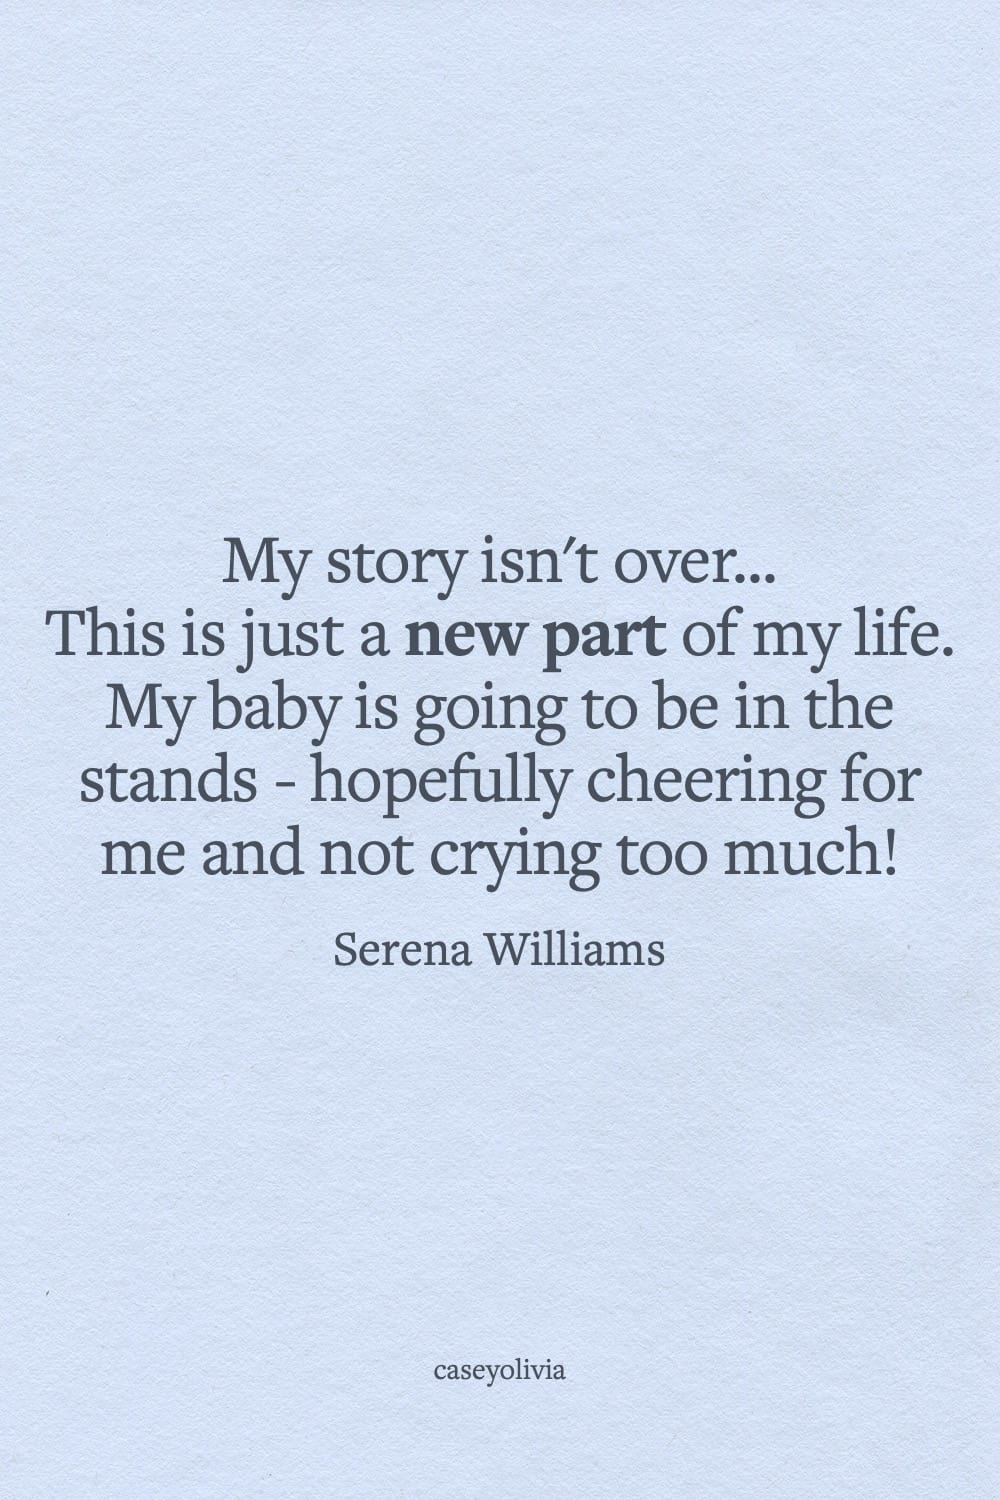 new part of my life quote about becoming a mother